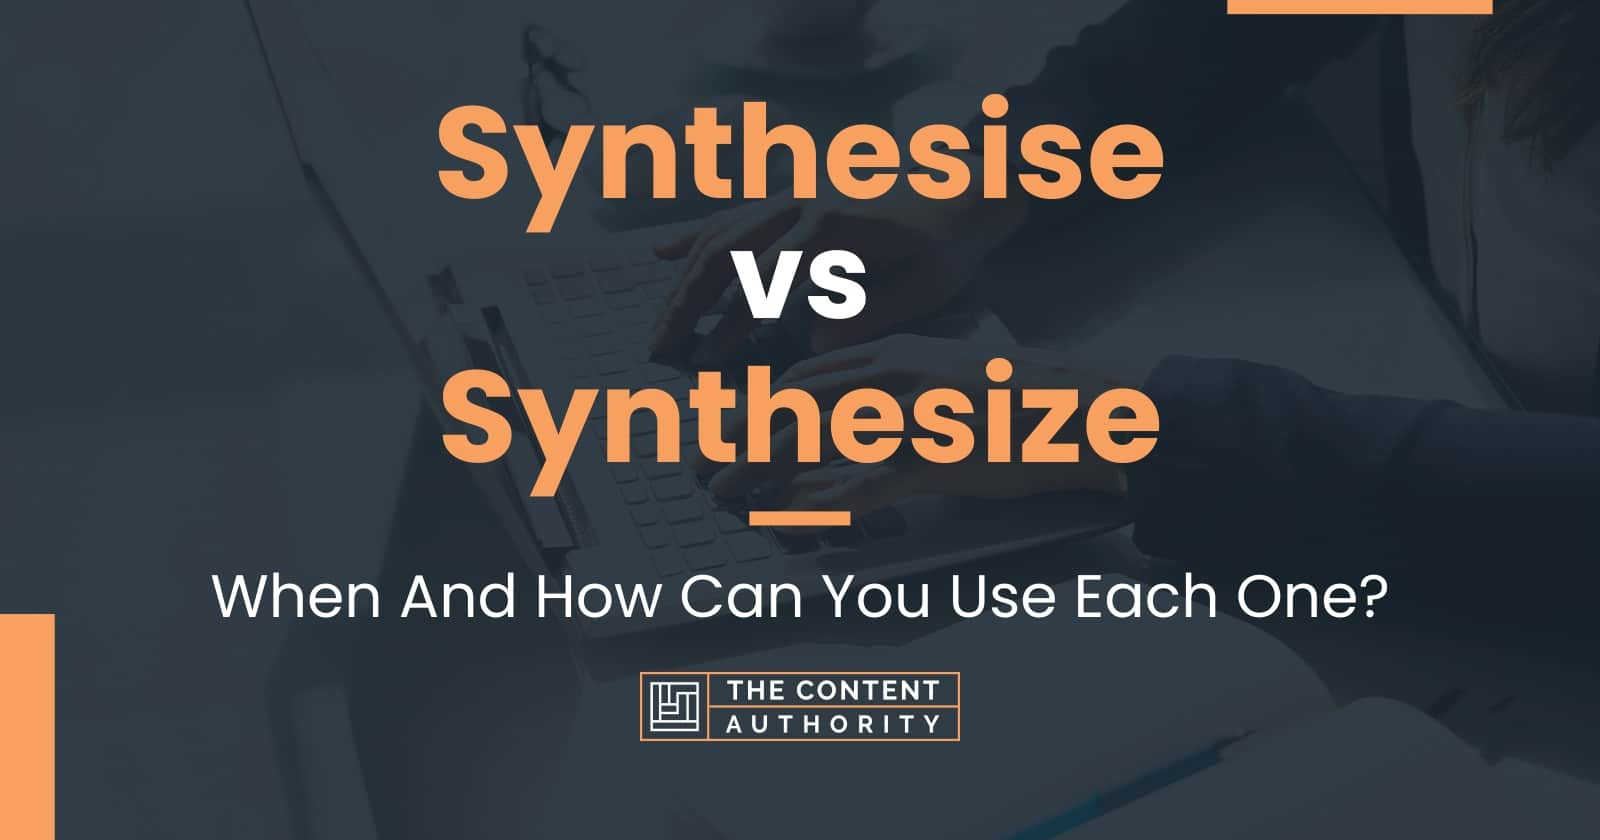 Synthesise vs Synthesize: When And How Can You Use Each One?